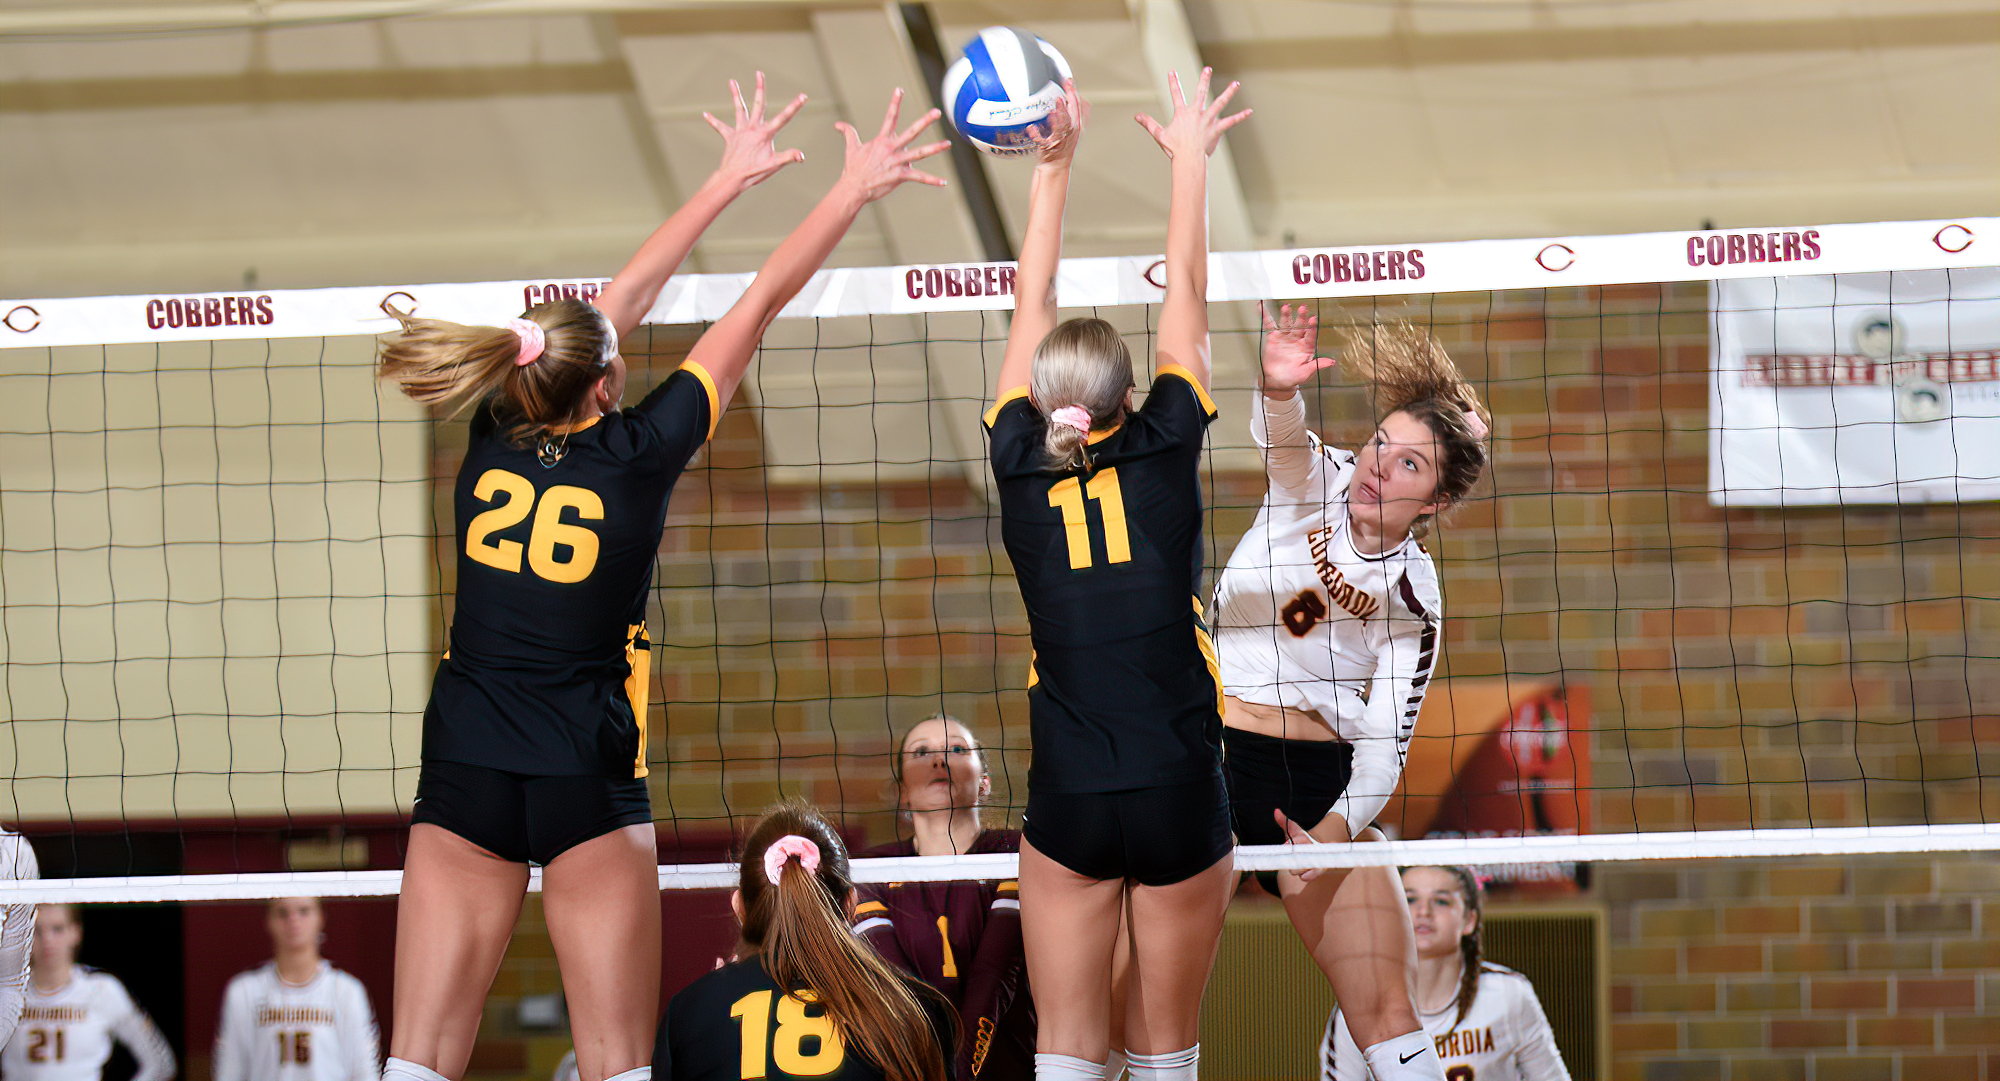 Senior Brook Carney hits the ball through the block for one of her 11 kills in the Cobbers' match with Gustavus. She now has 161 kills for the year.